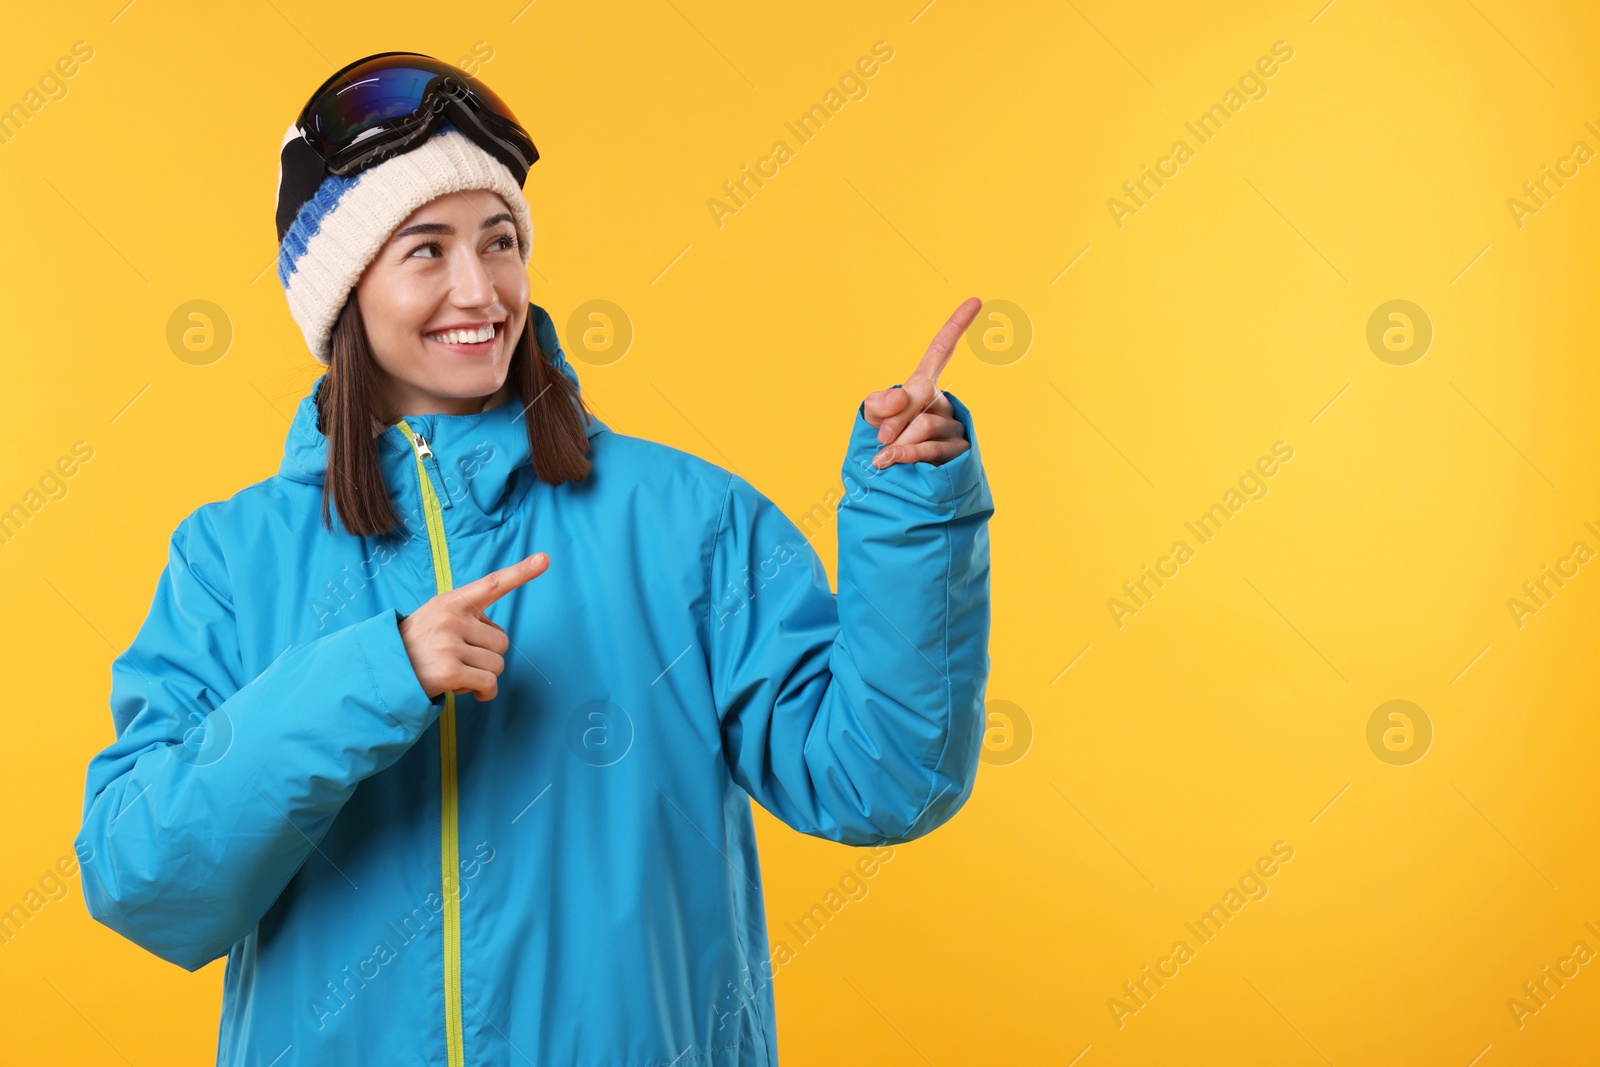 Photo of Winter sports. Happy woman with snowboard goggles pointing at something on orange background, space for text